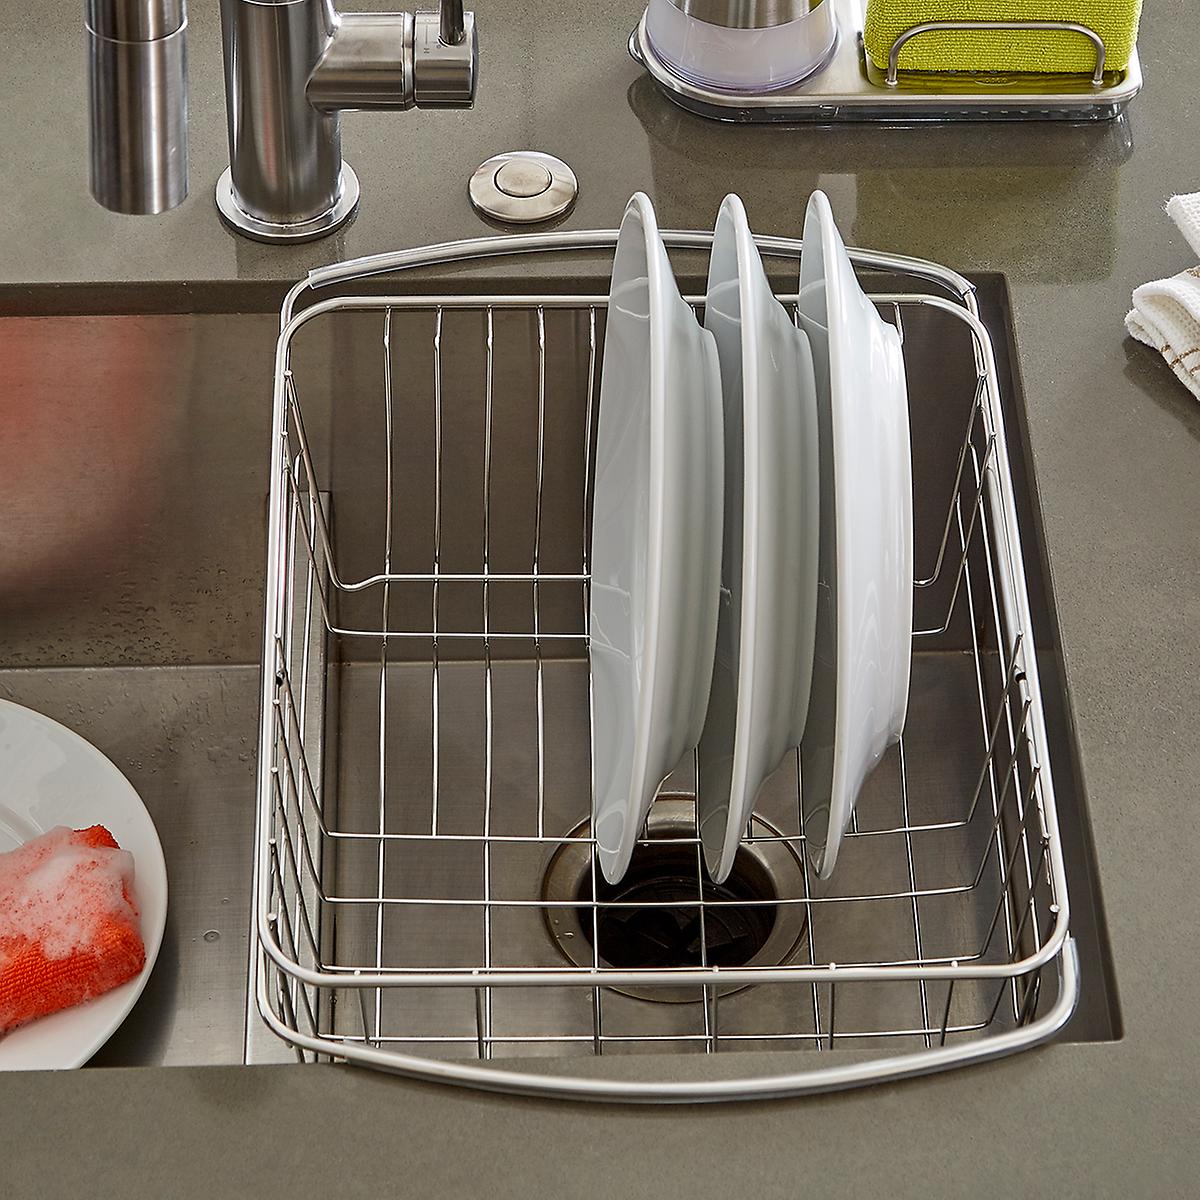 kitchen dish rack - Ways to Make Your Home Look Elegant on a Budget